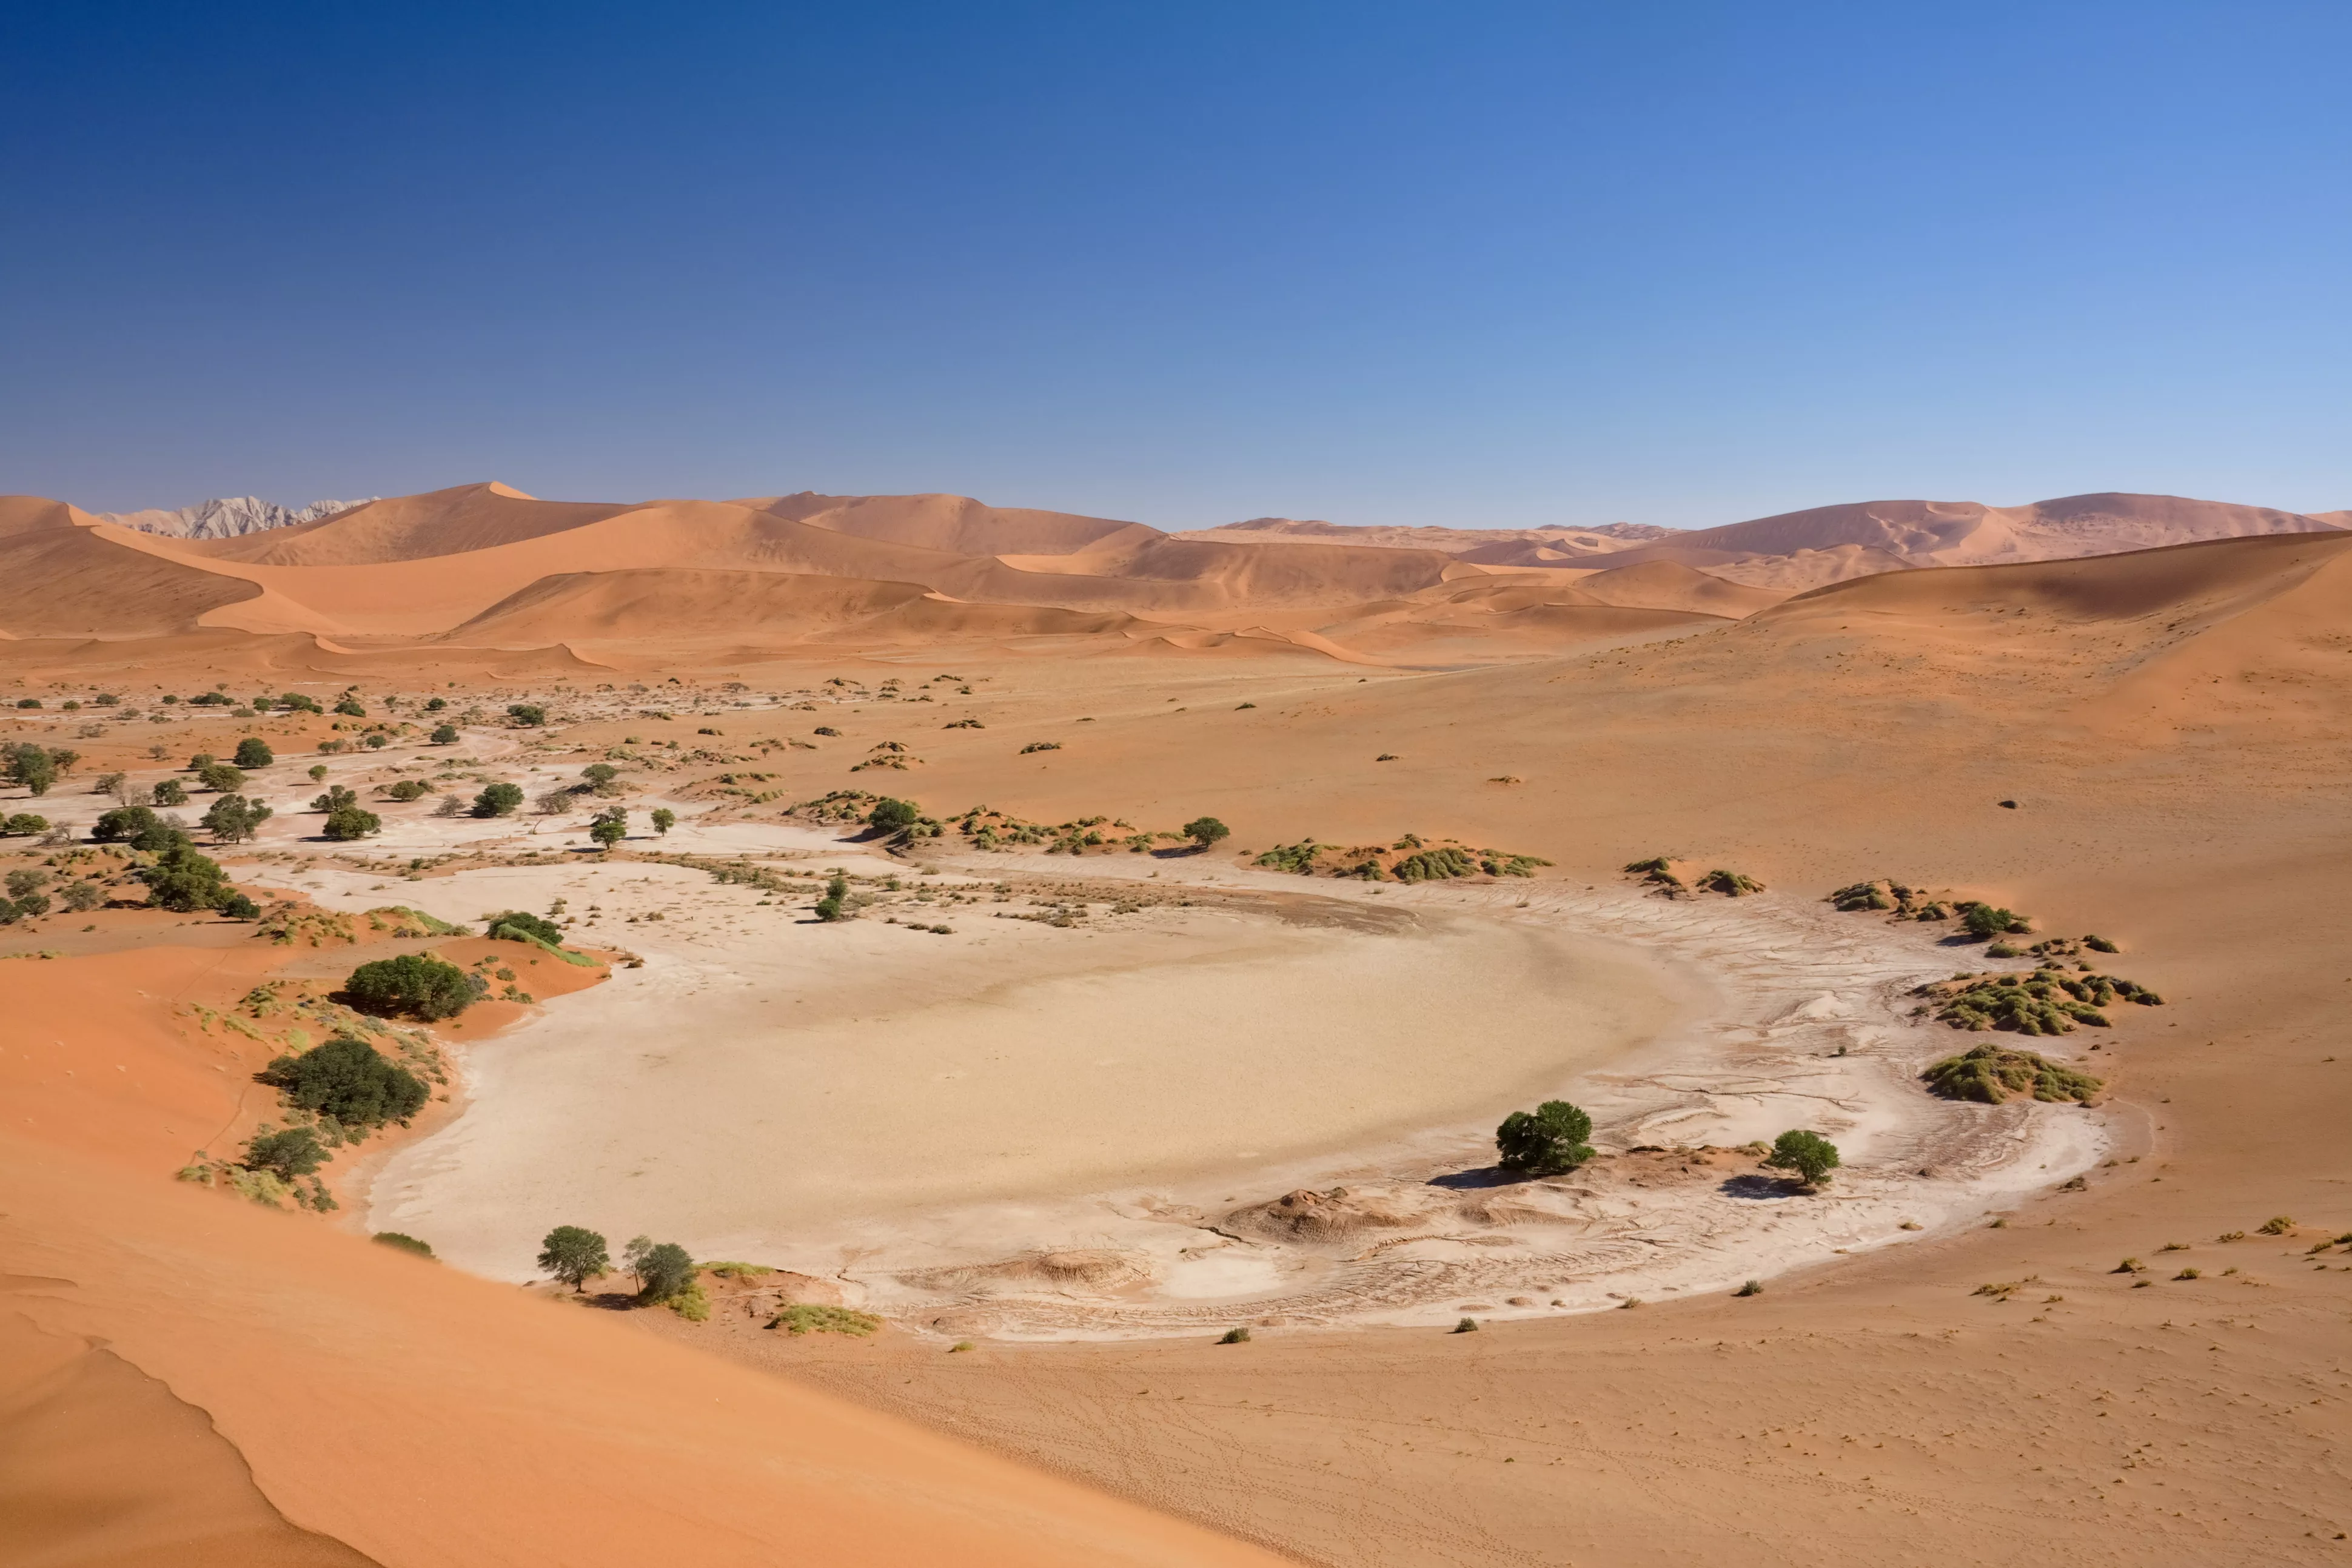 Sossusvlei in Namibia, Africa | Deserts - Rated 4